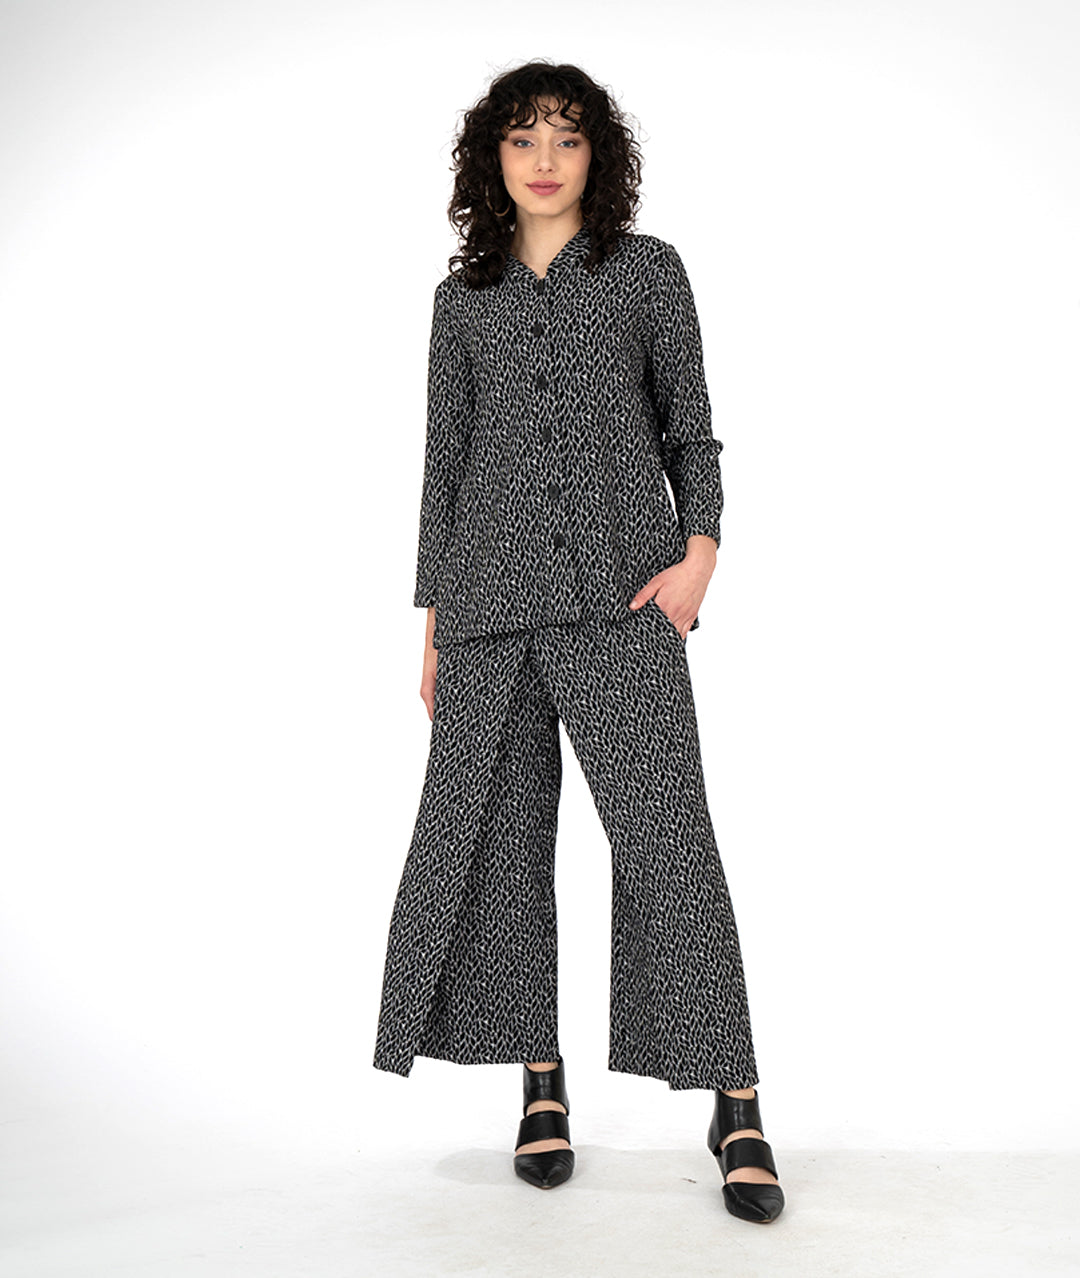 model in a wide leg grey and black leaf print pant with an overlapping front, worn with matching button down blouse with a standing collar and long sleeves